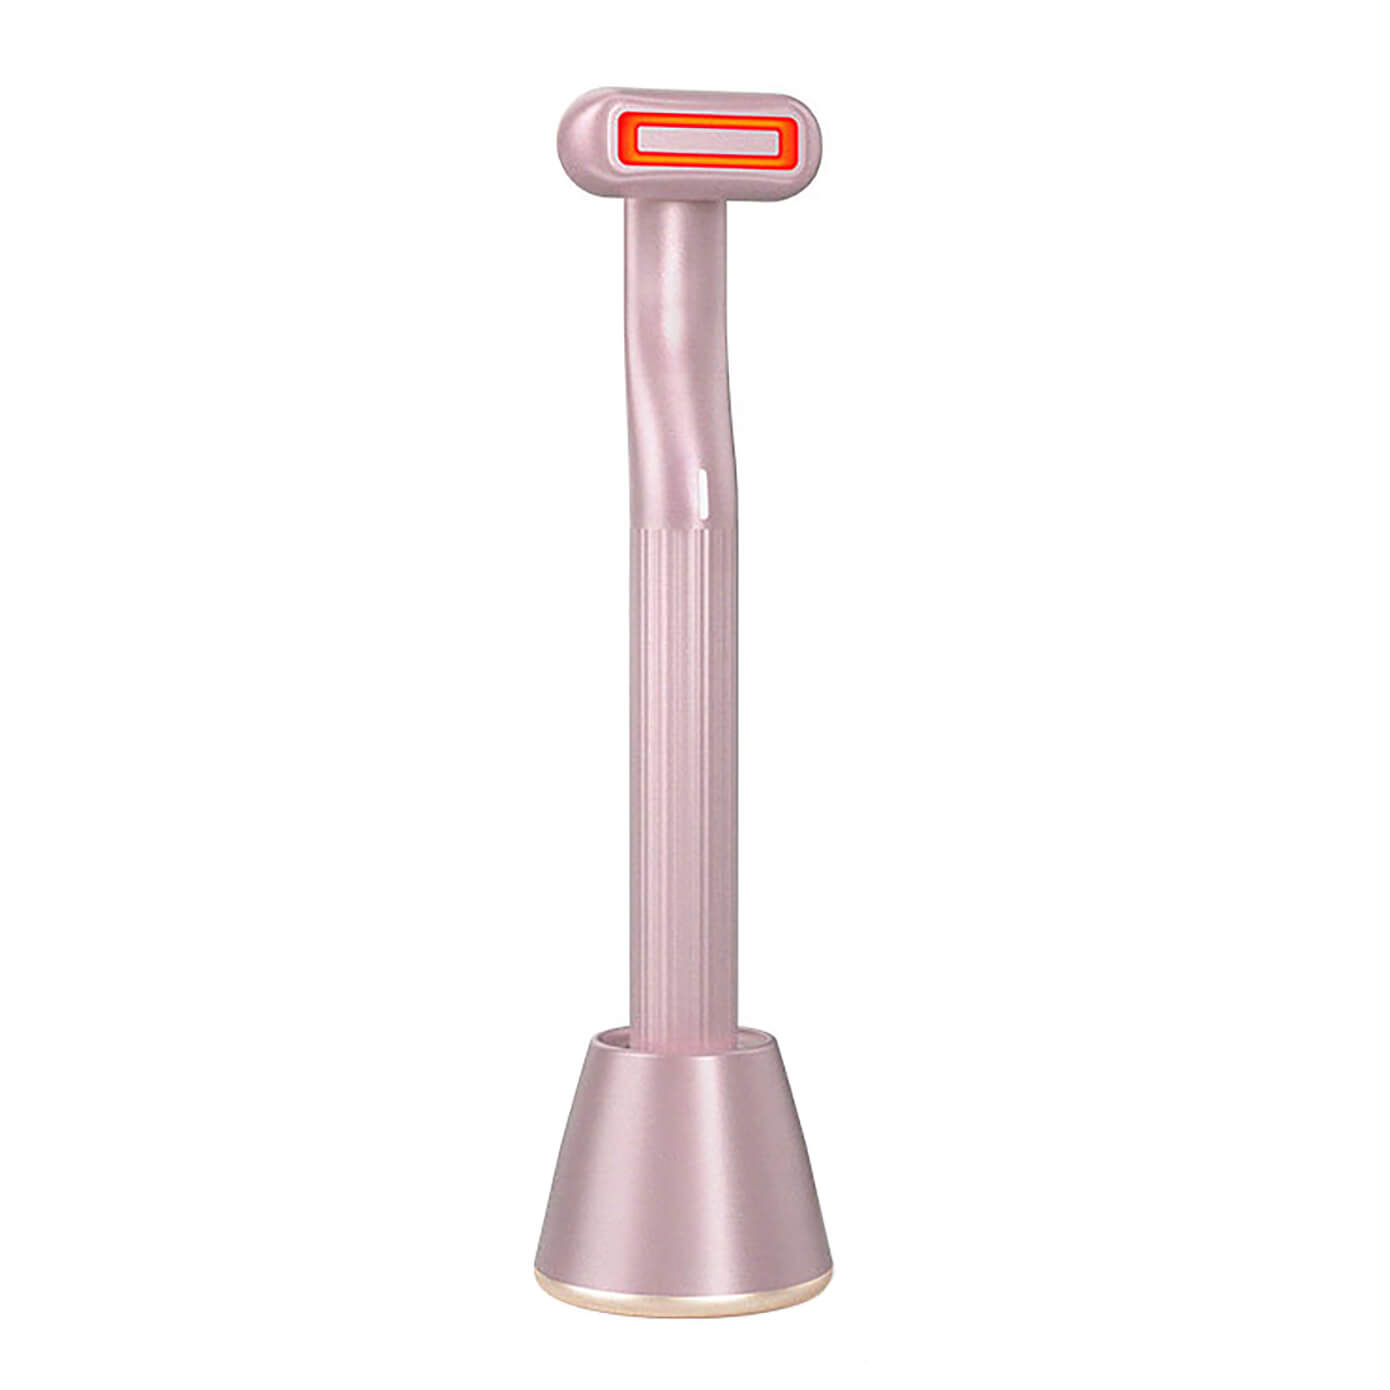 Nadove® Light Therapy Wand